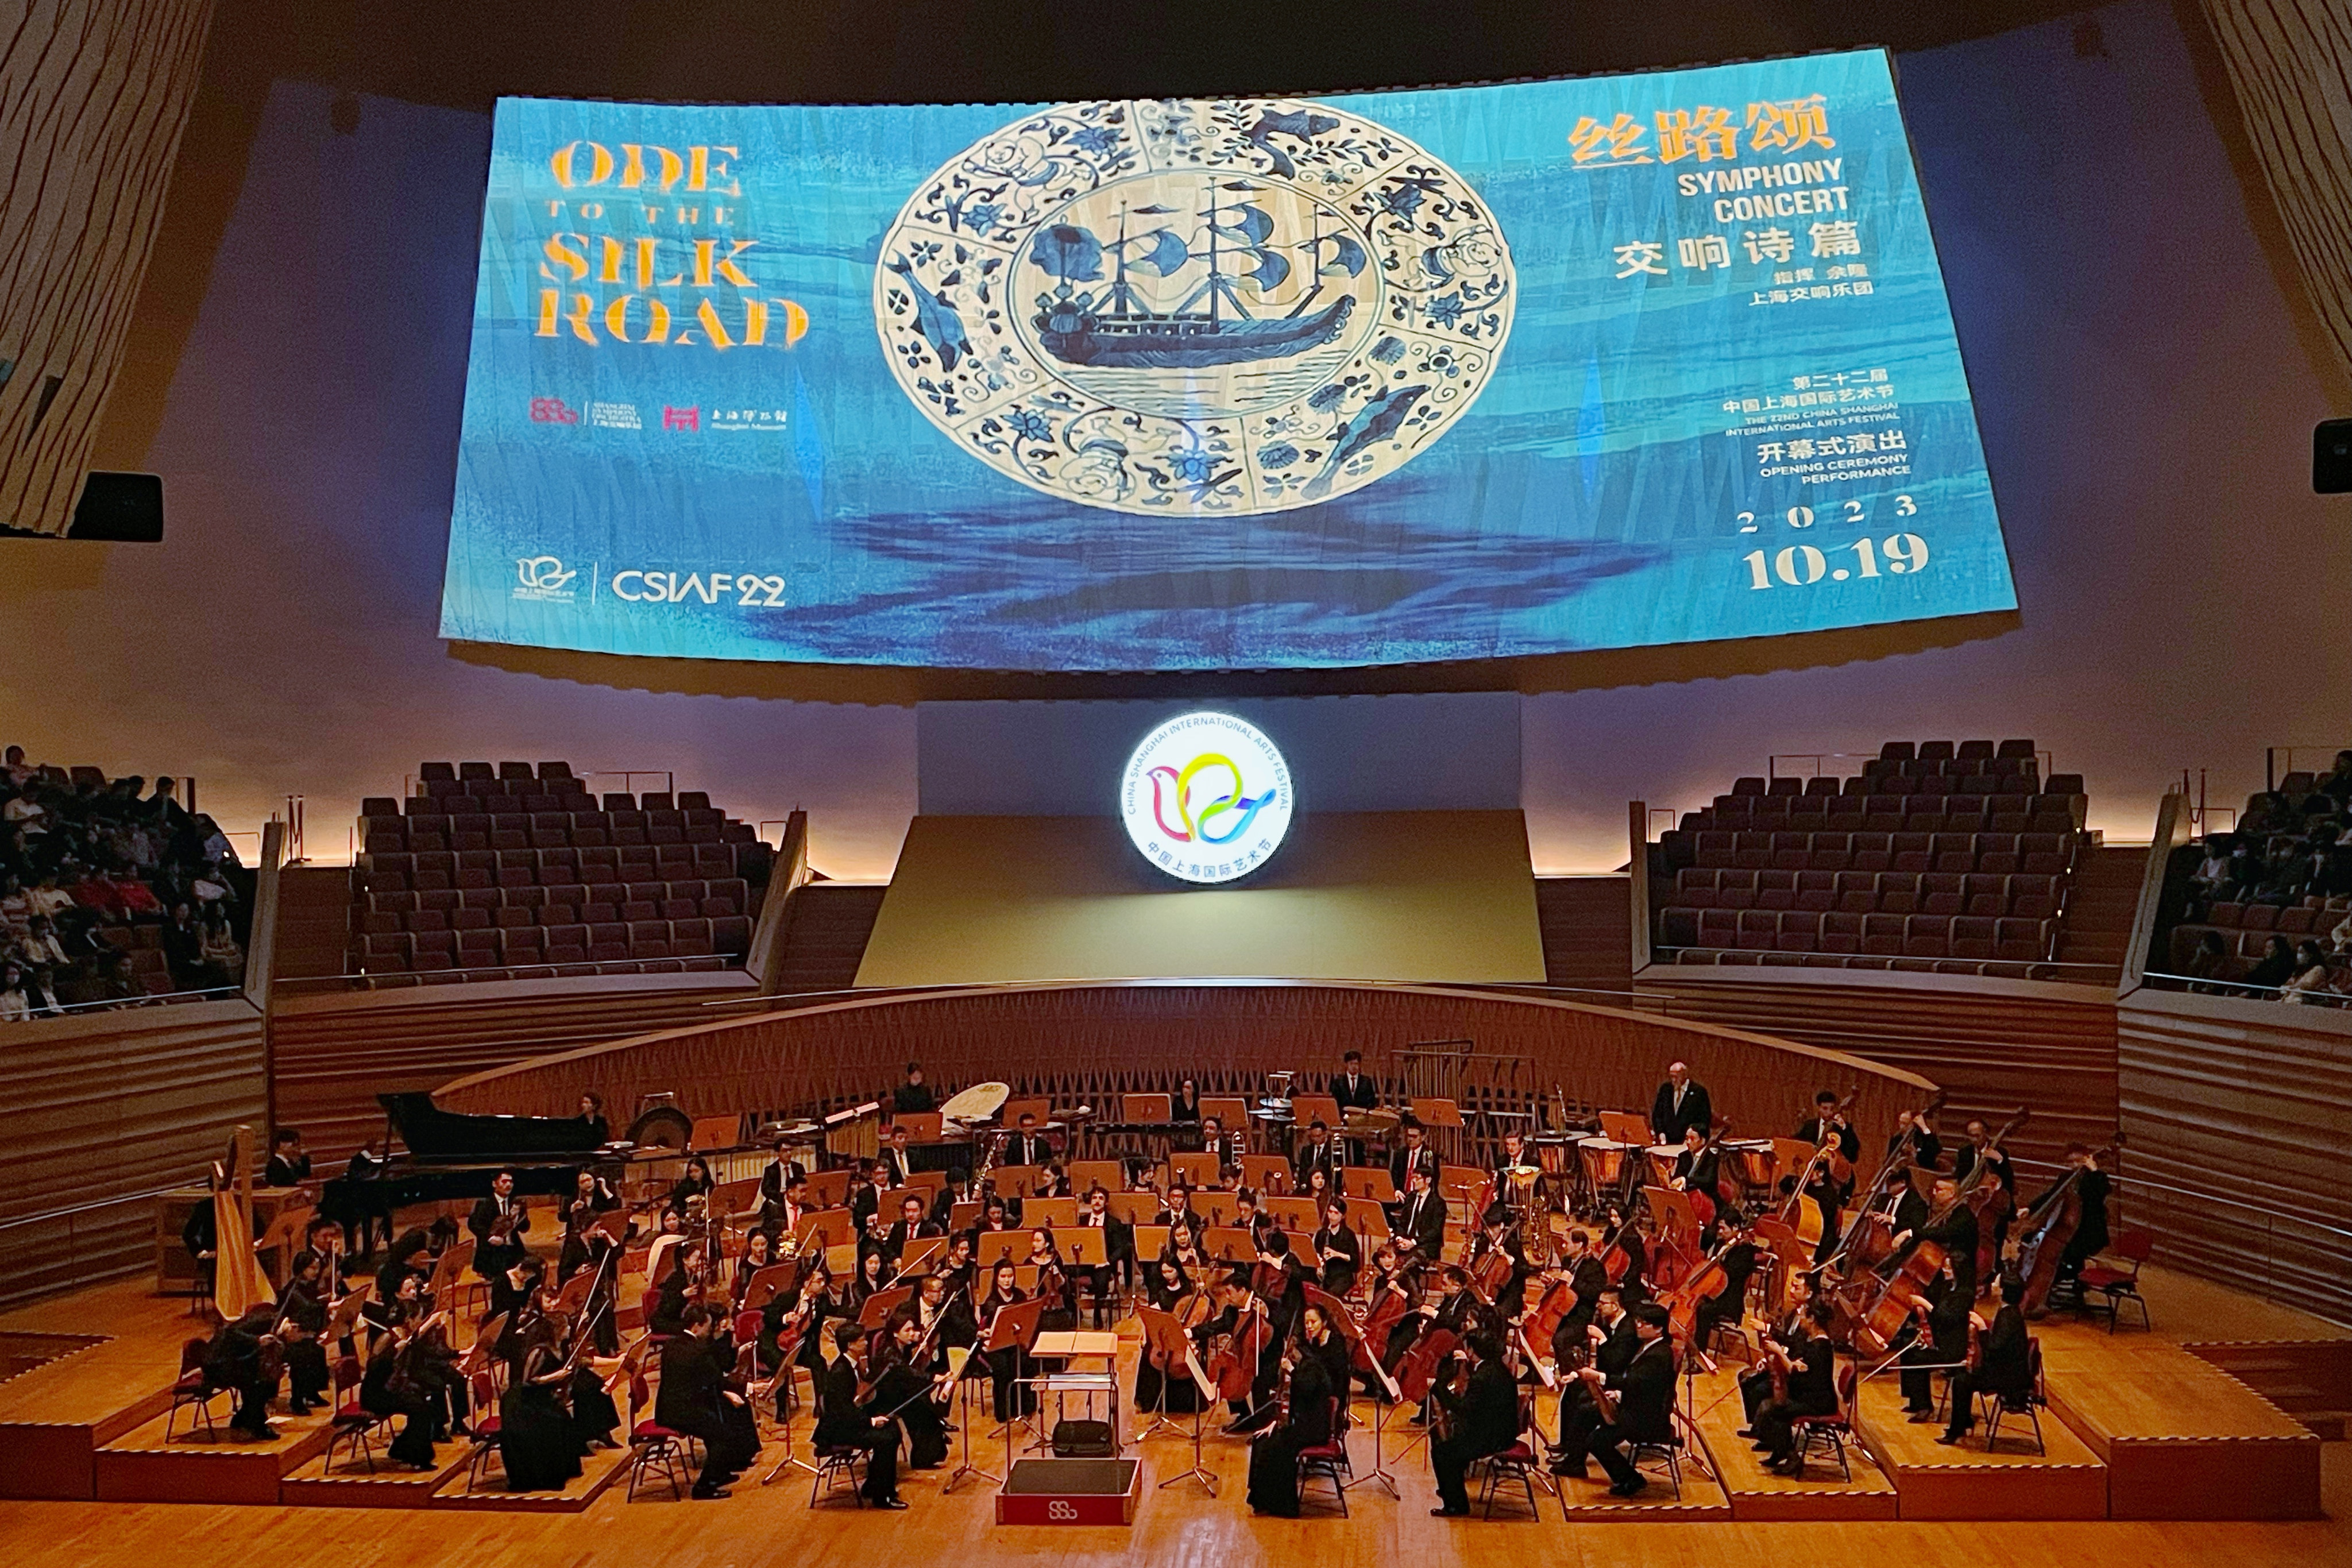 A concert called Ode To The Silk Road is performed by the Shanghai Symphony Orchestra on October 19, 2023 at the Shanghai International Art Festival. Photo: SCMP Handout